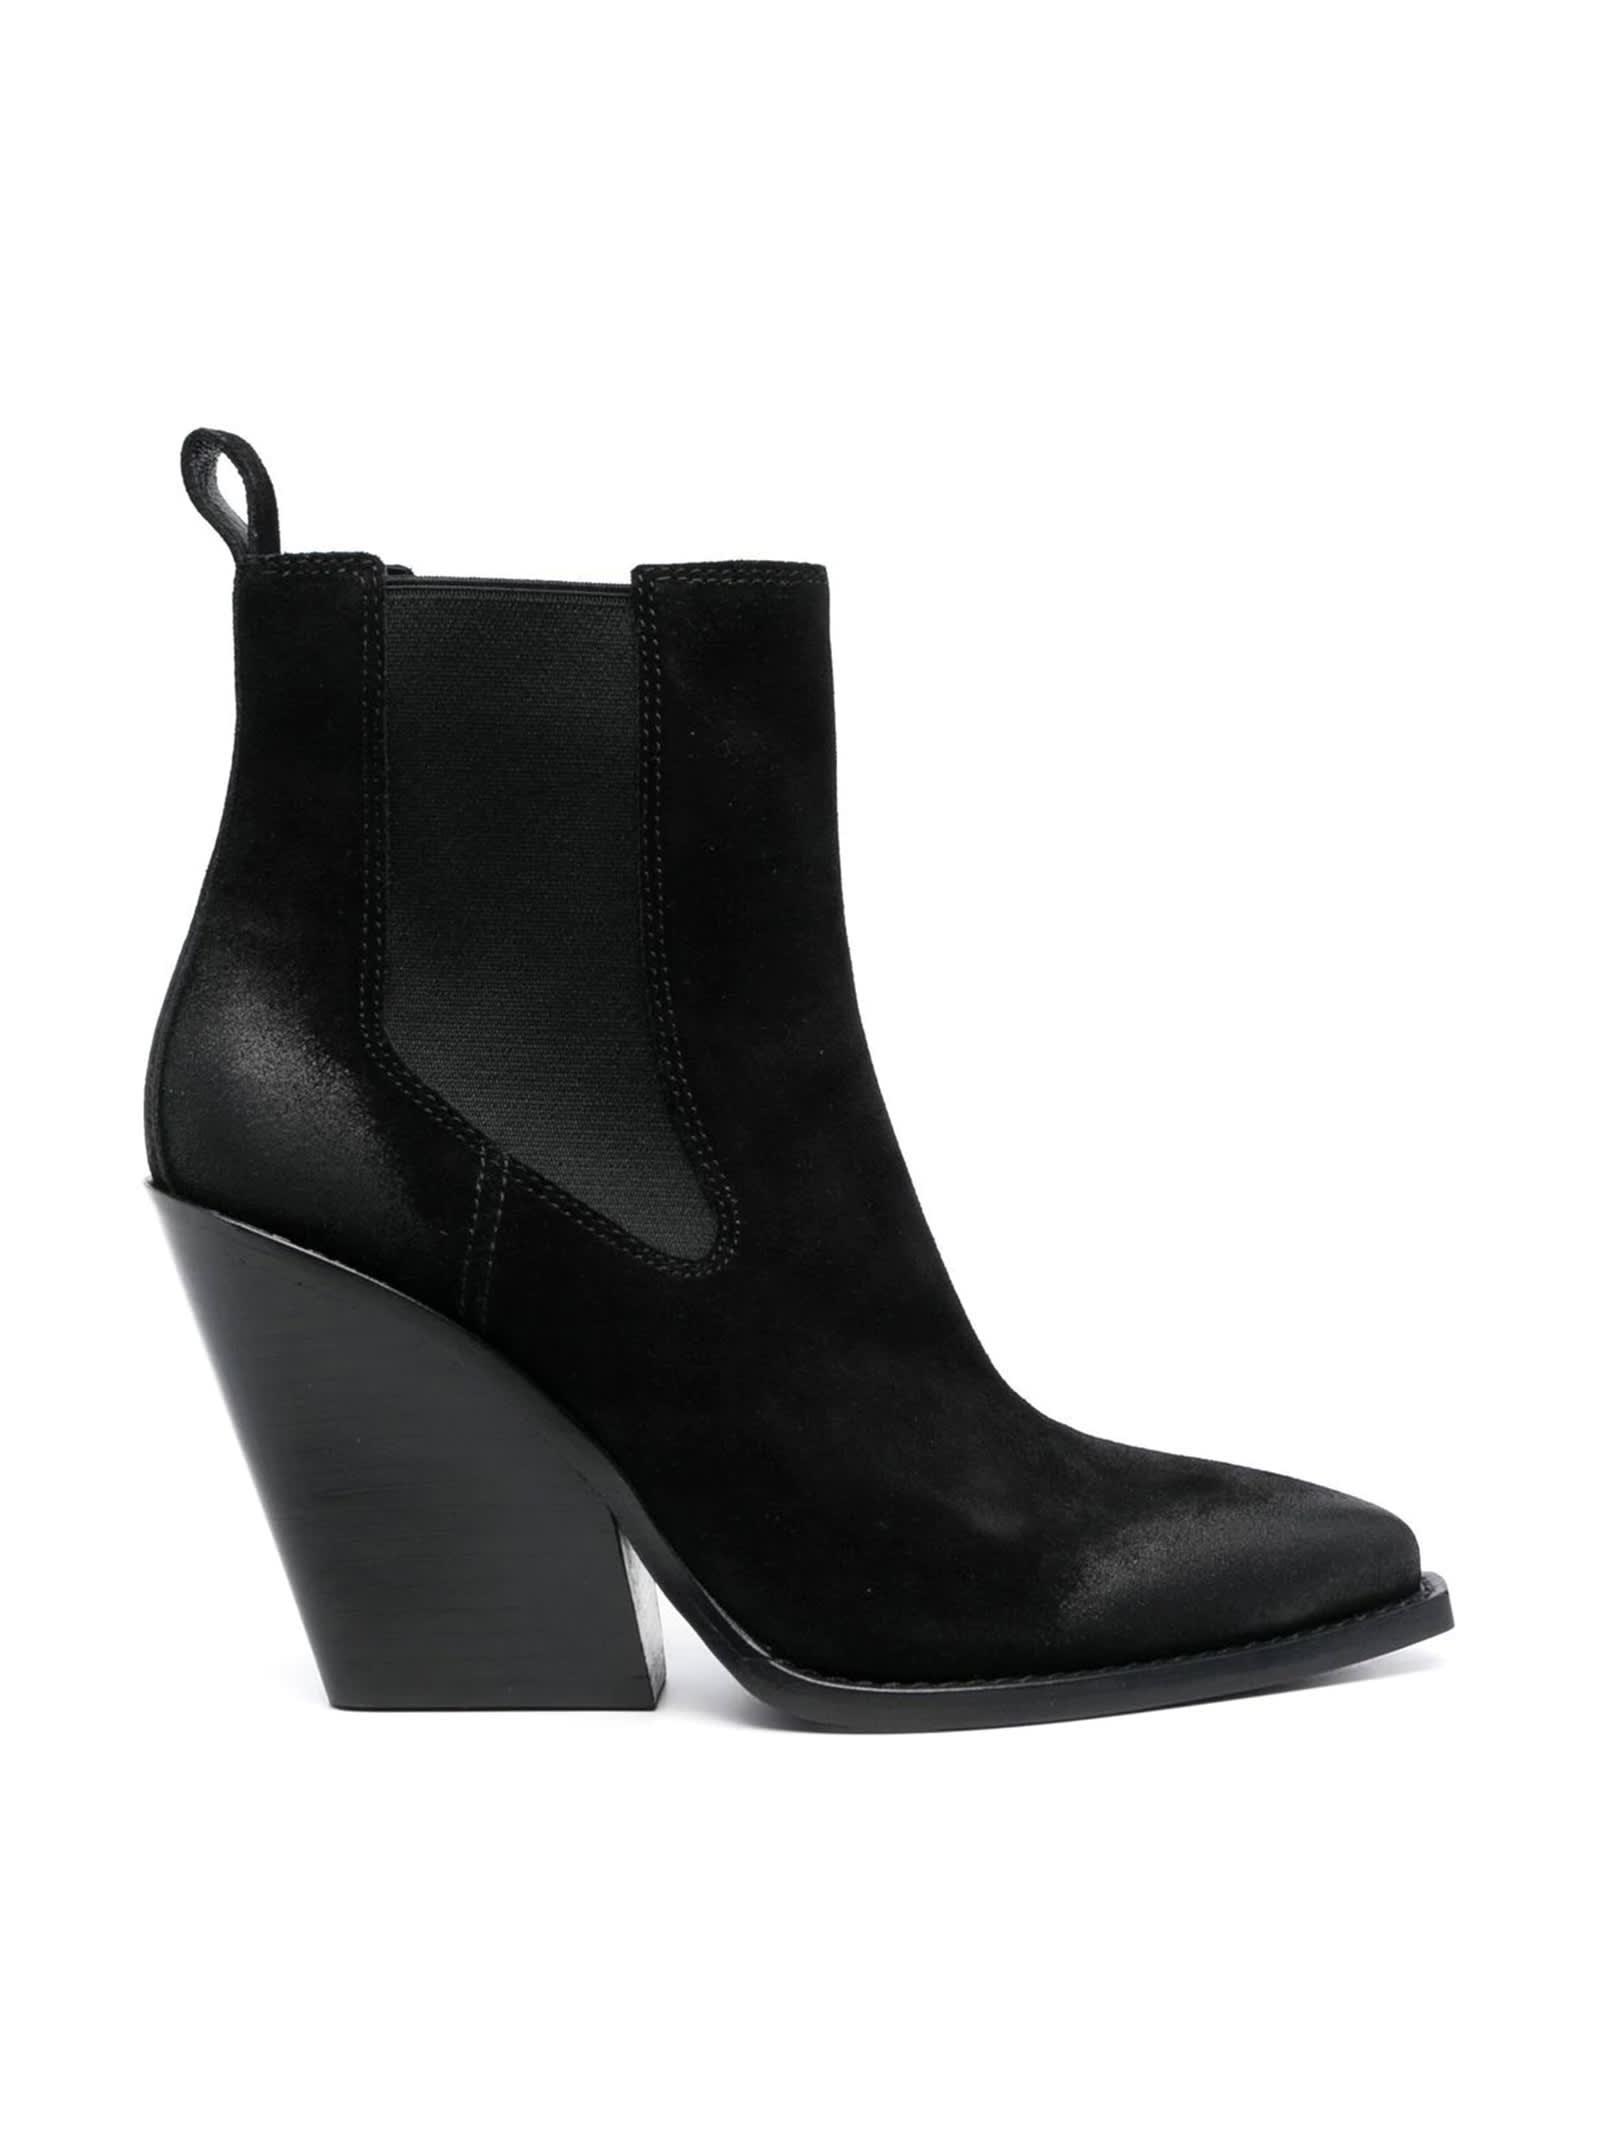 Ash Bowie Texan Boots in Black | Lyst